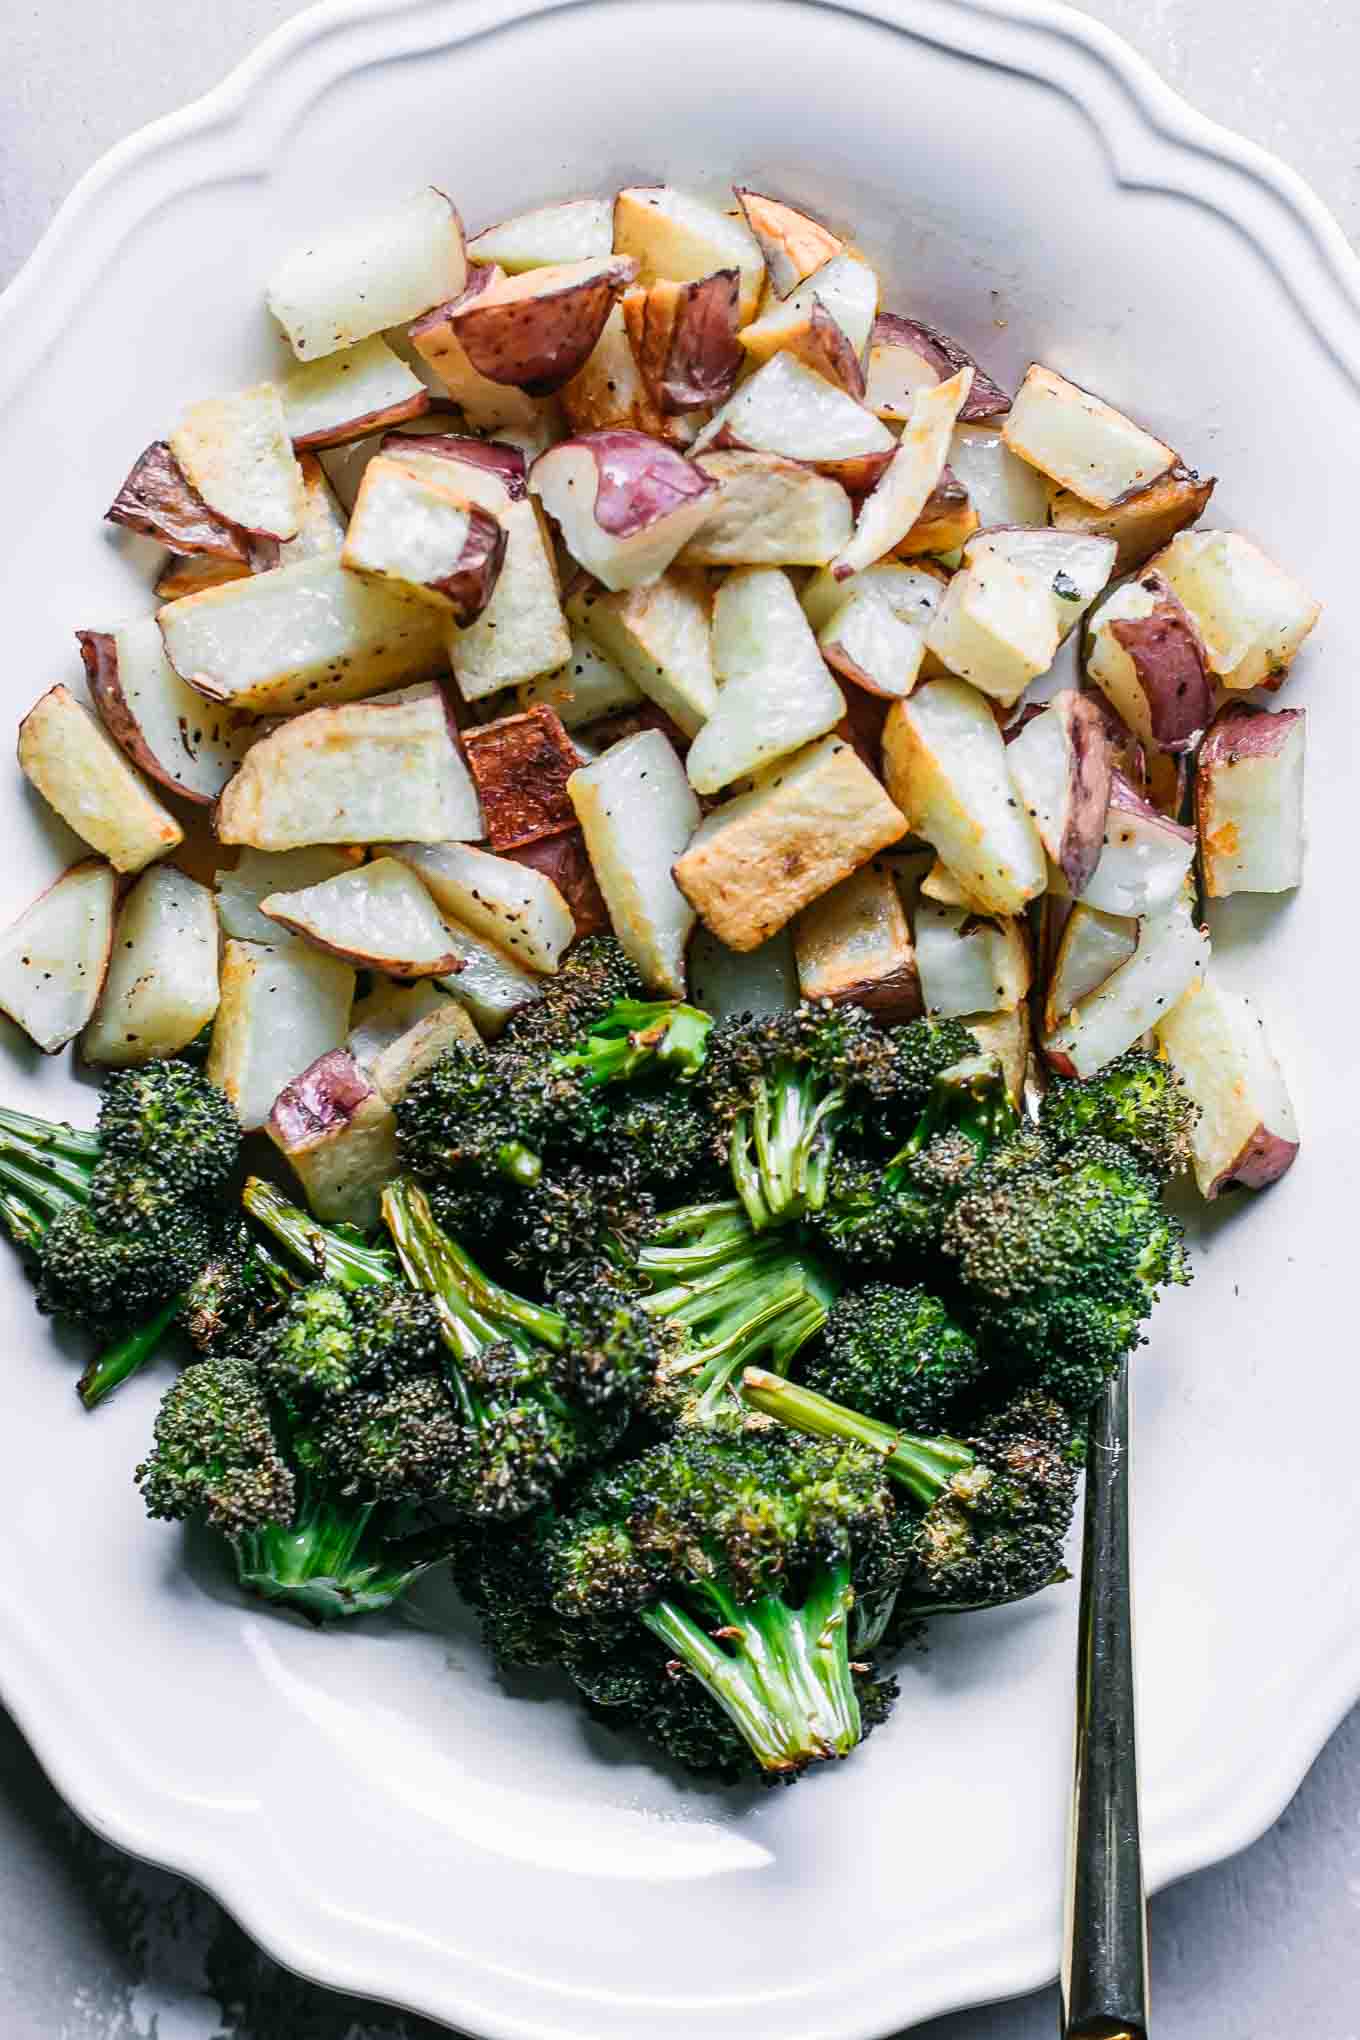 a close up photo of baked broccoli and potatoes with a gold fork